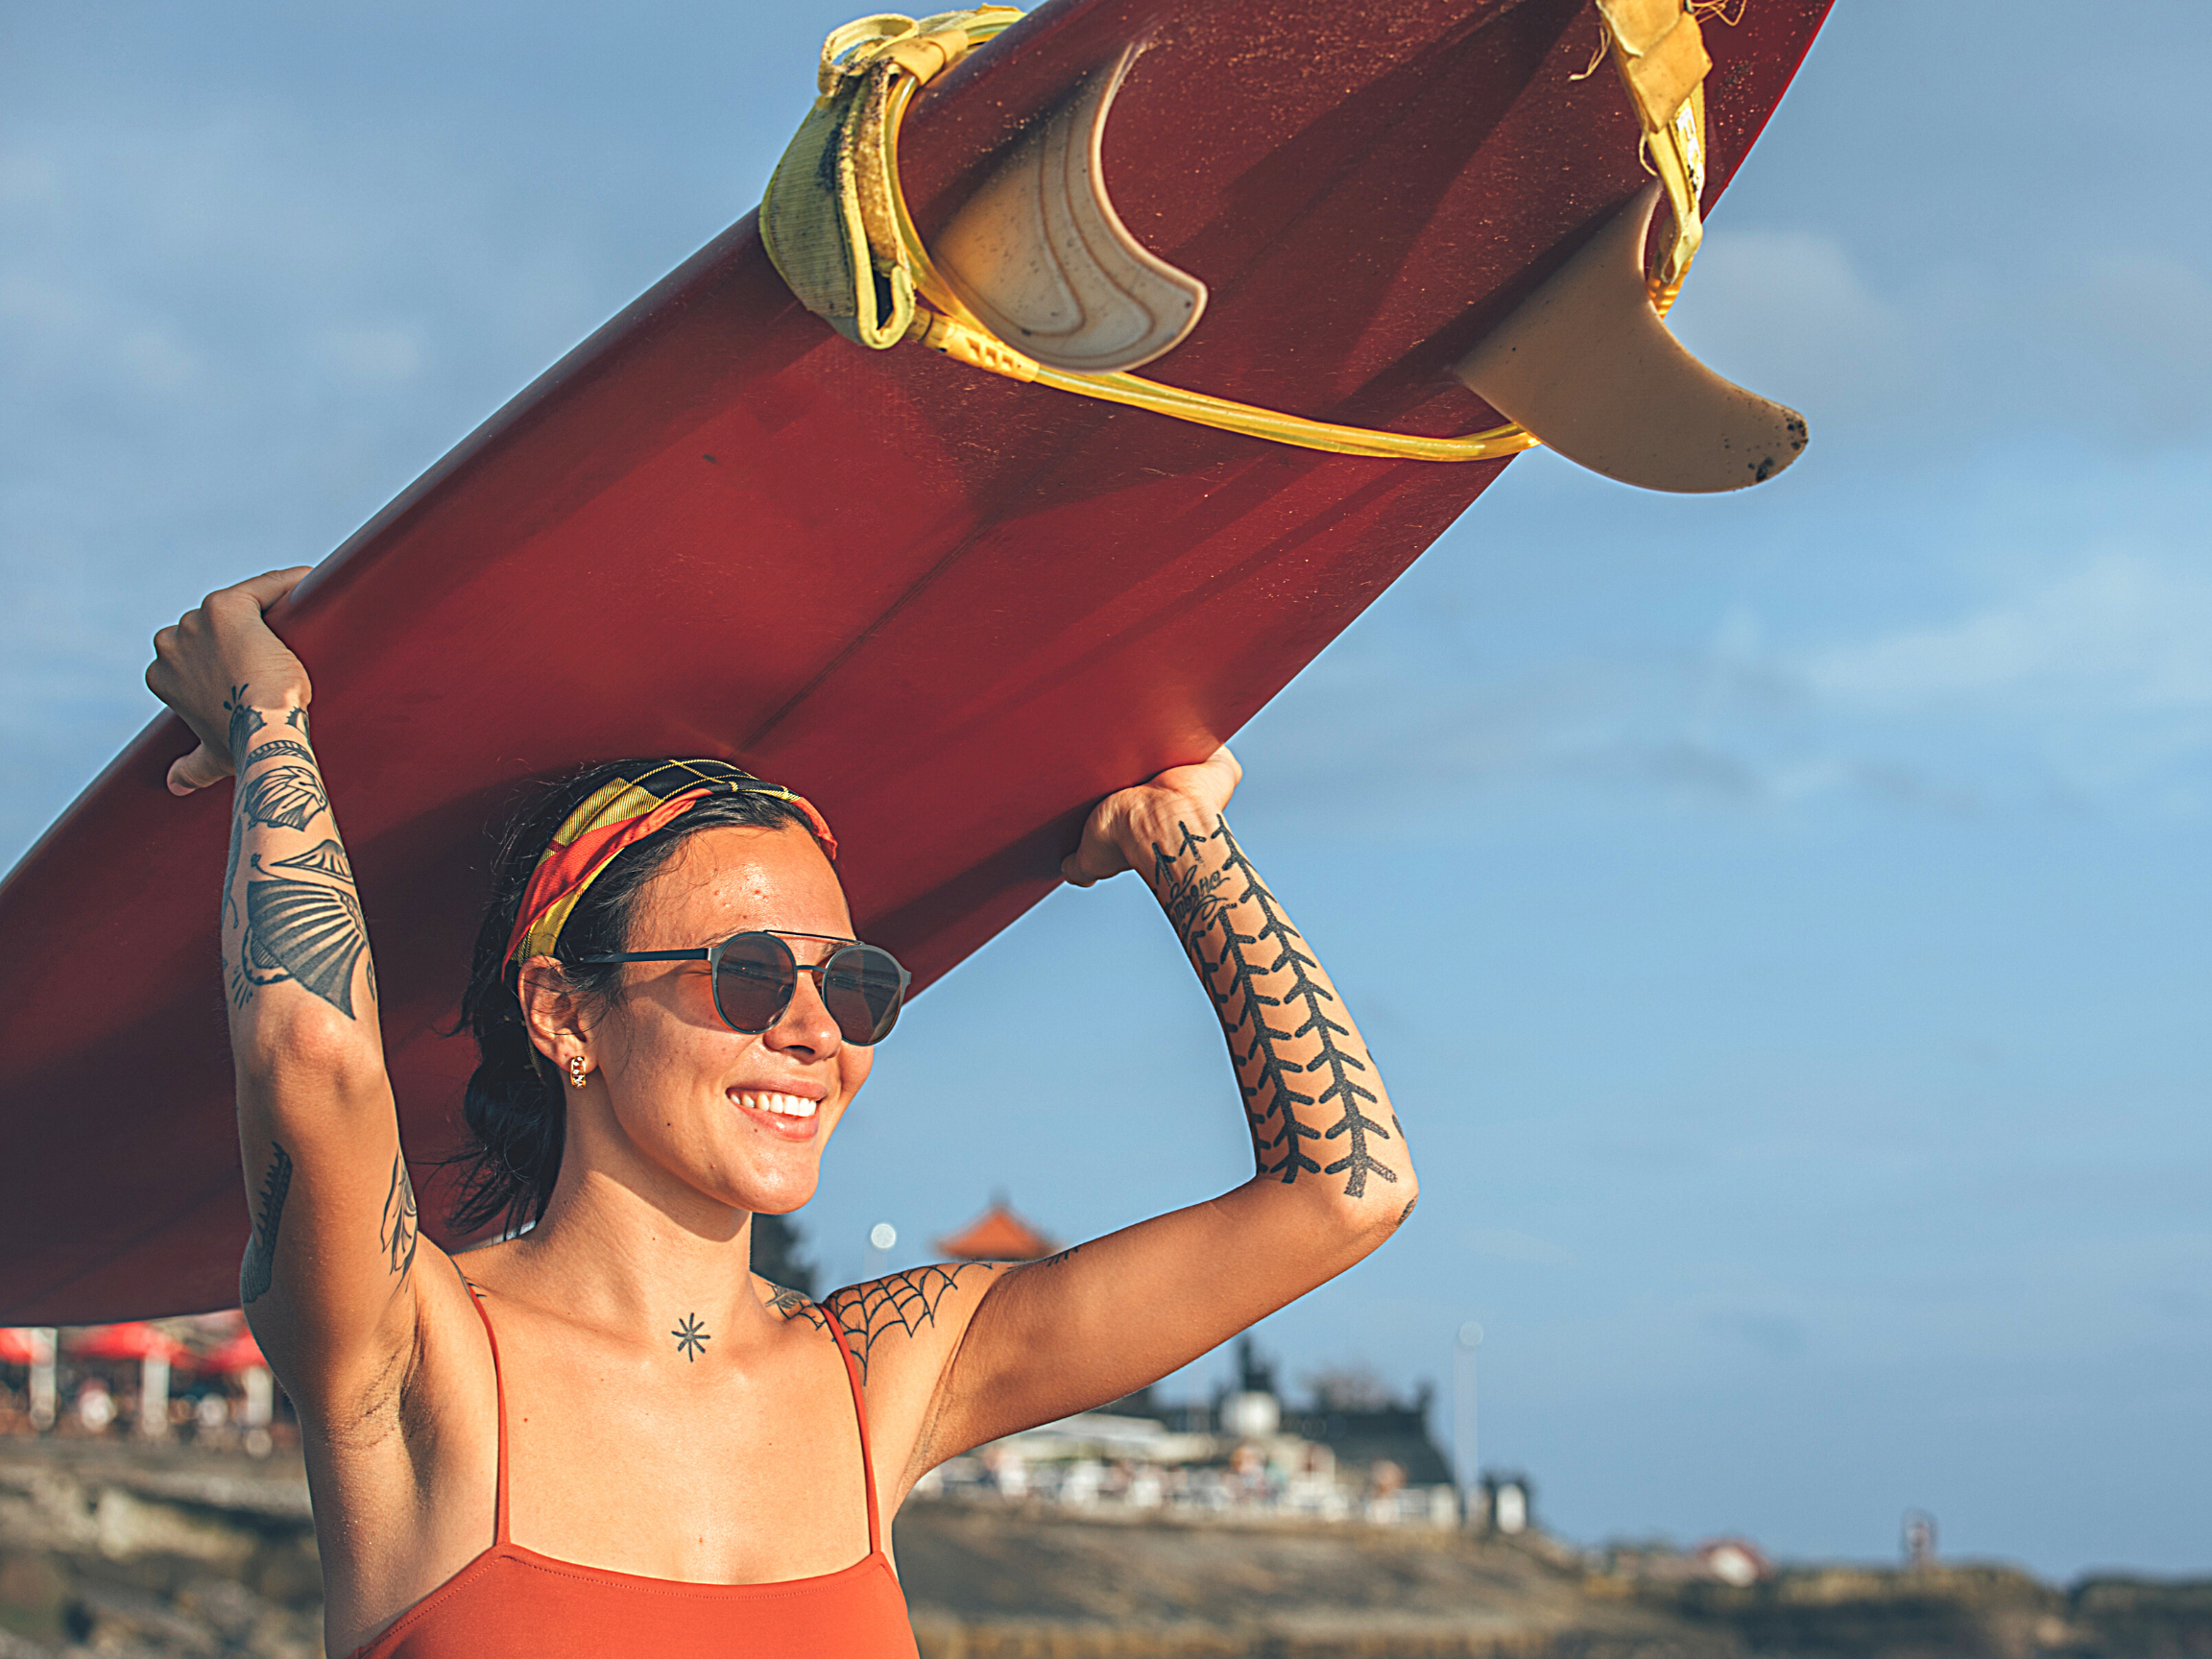 a smiling woman with tattoos wearing sunscreen with a surfboard on her head walking towards the beach for water surfing 